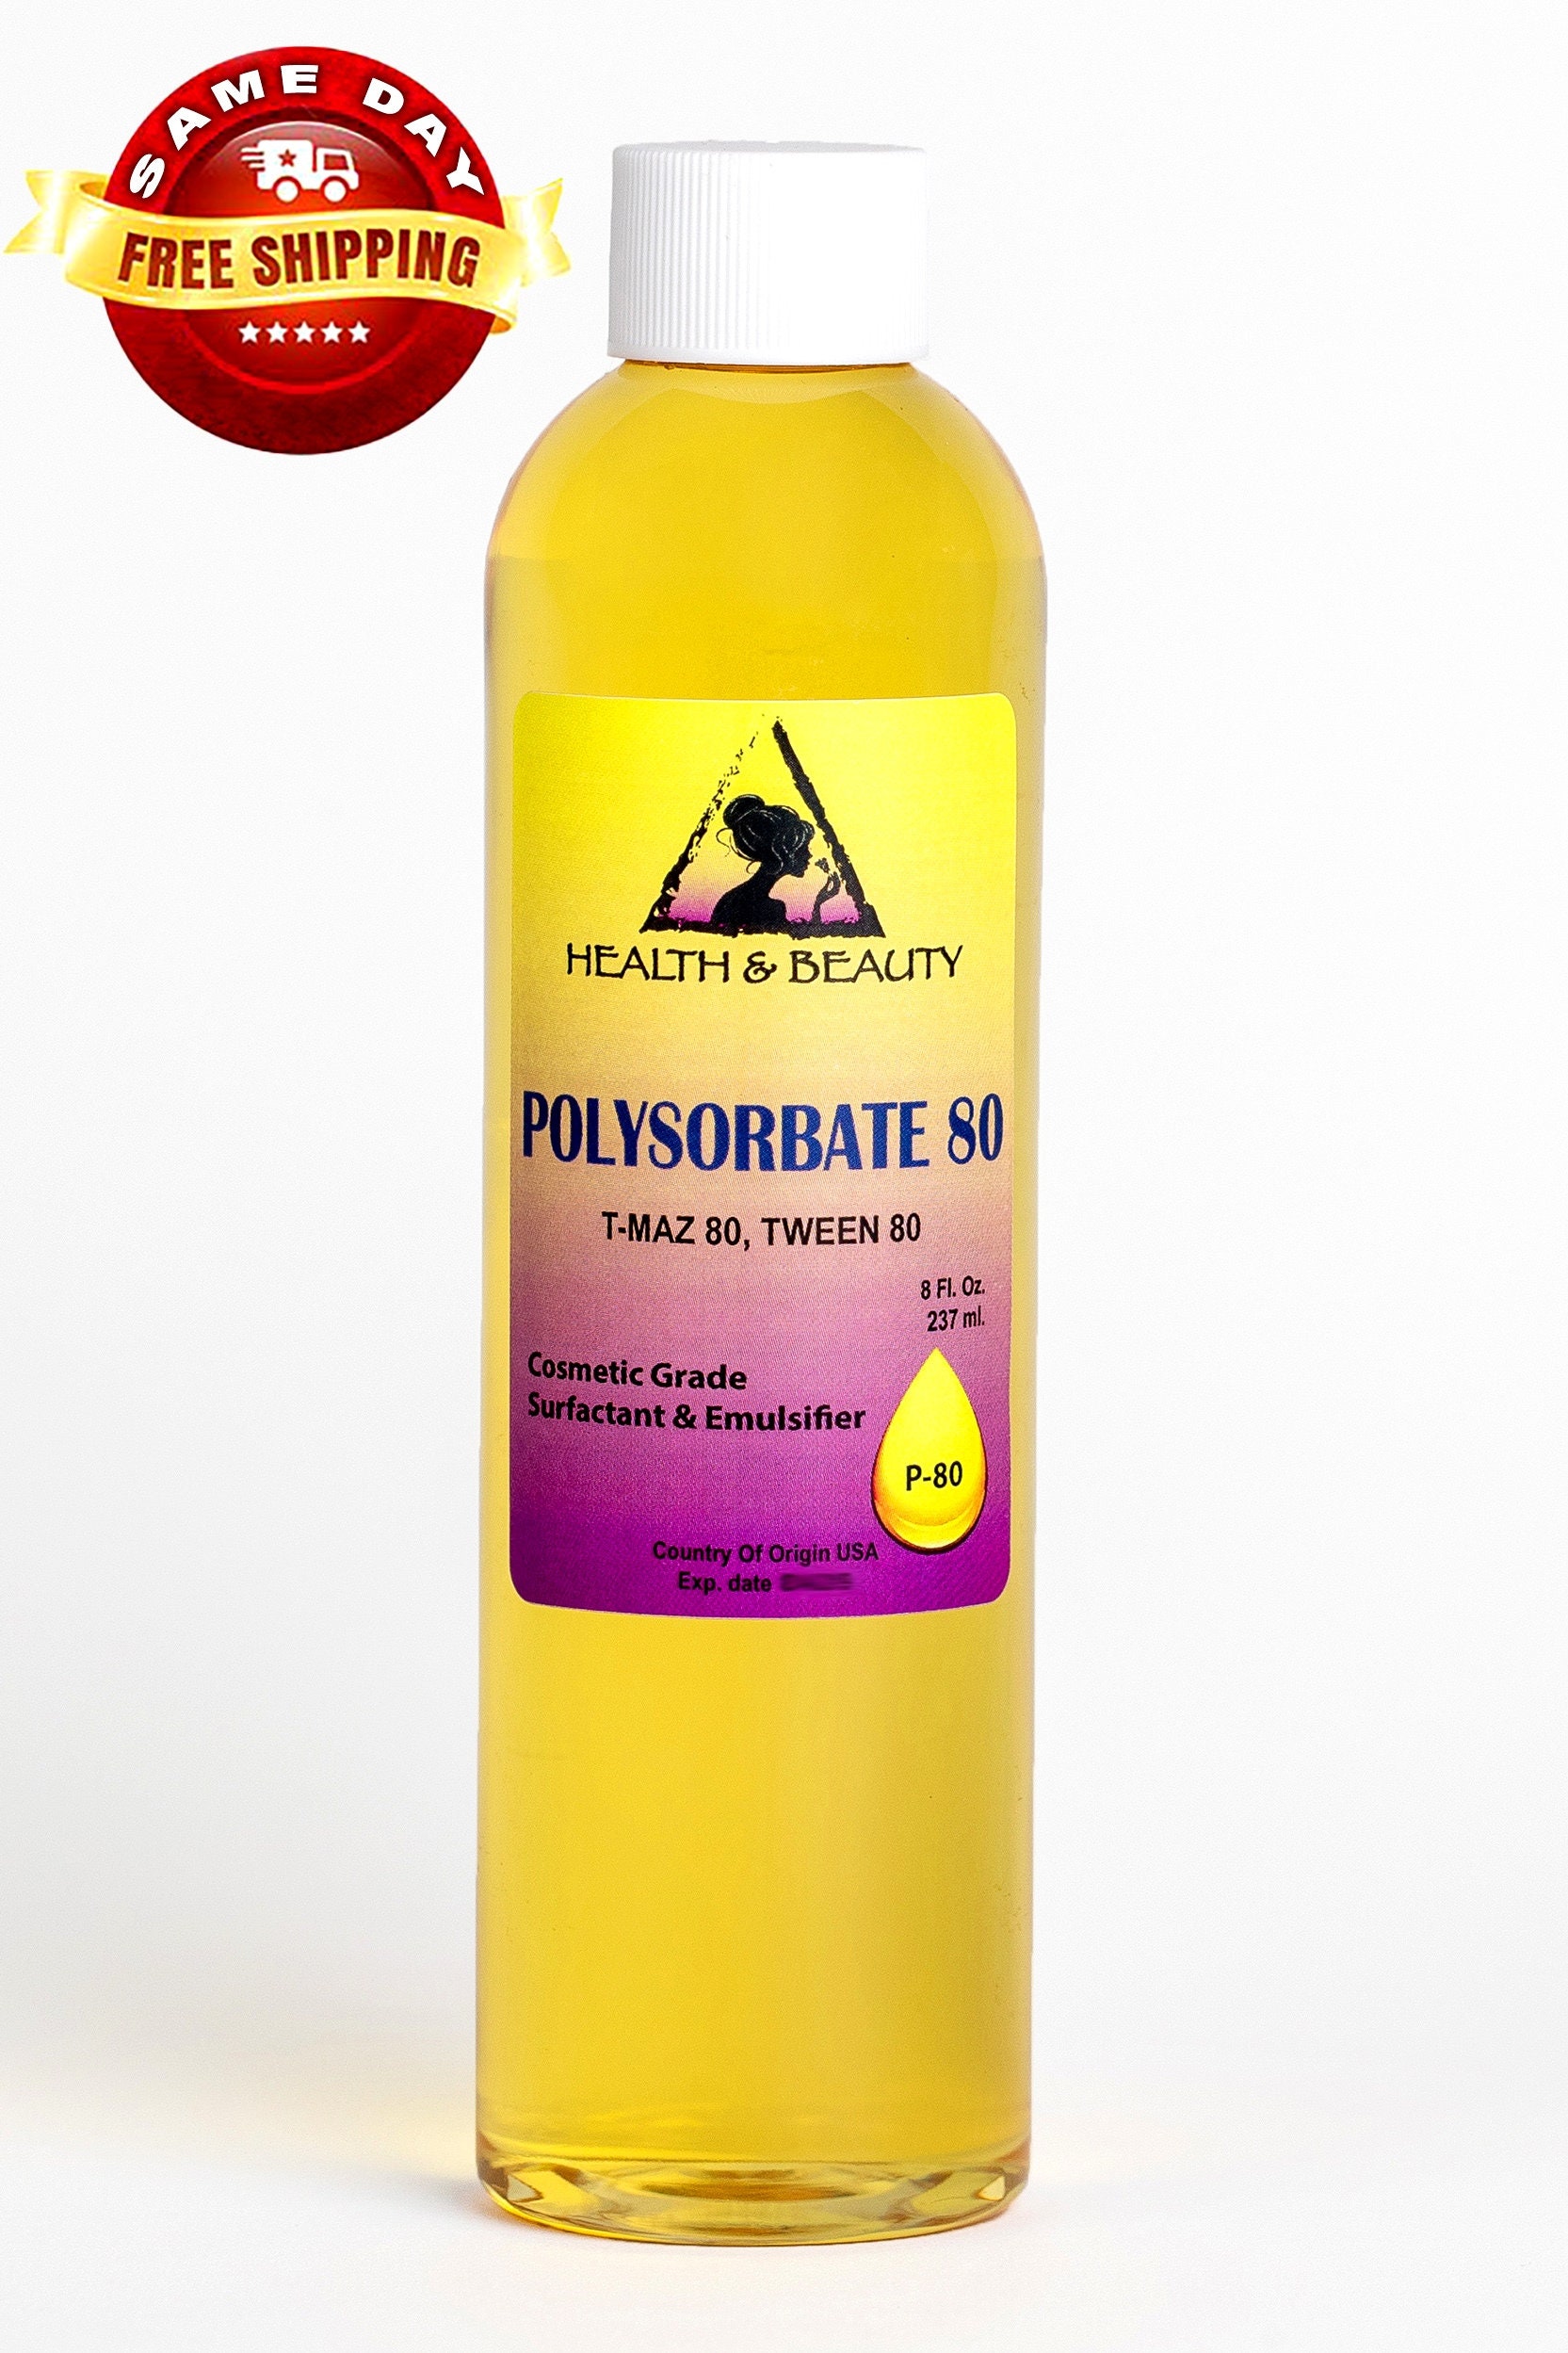 Polysorbate 80 by Velona 64 oz | Solubilizer, Food & Cosmetic Grade | All Natural for Cooking, Skin Care and Bath Bombs, Sprays, Foam Maker | Use